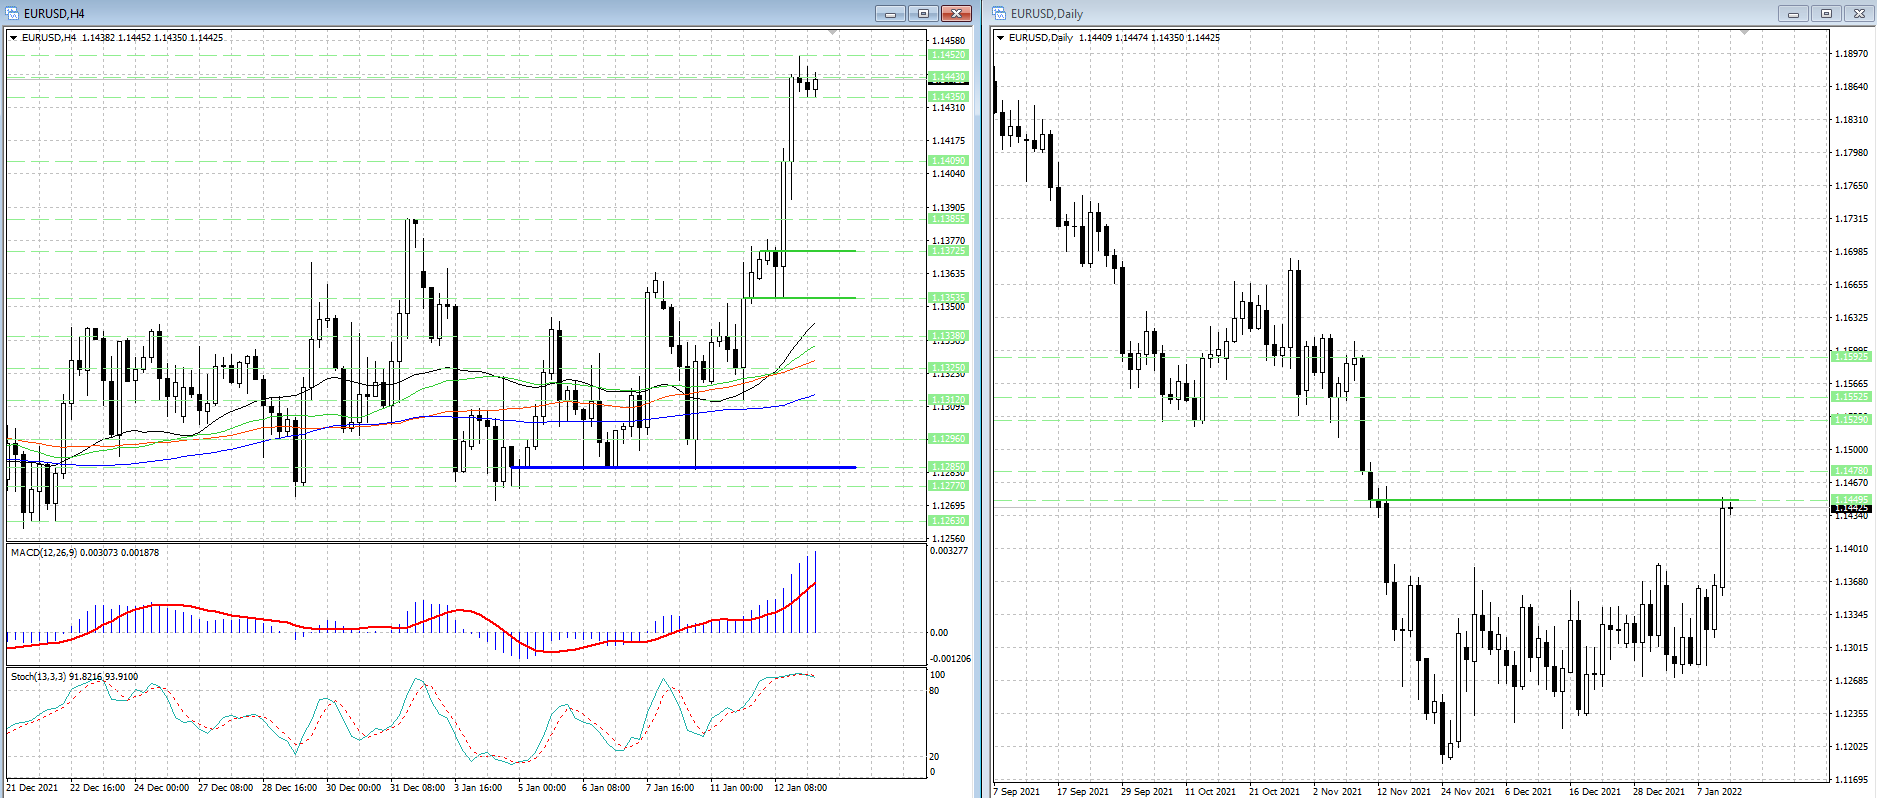 The EUR/USD currency pair is consolidating after a surge of bullish sentiment...